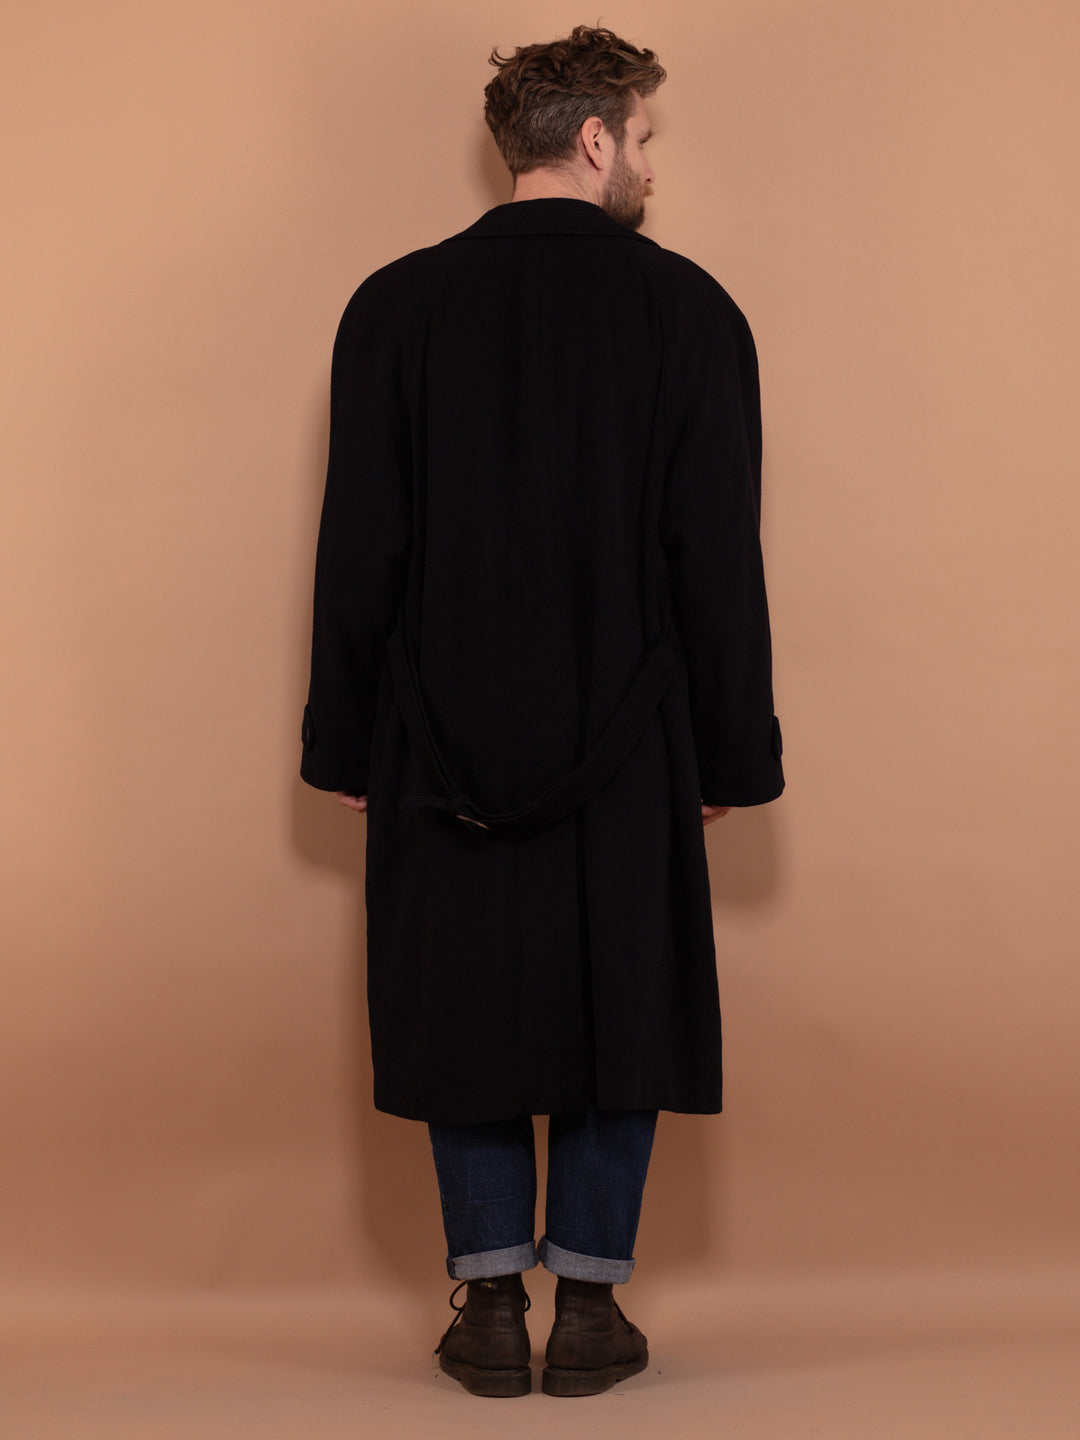 Men Cashmere Blend Coat 90's, Size XXL, Vintage Greatcoat, Navy Blue Wool and Cashmere Coat, Classic Style Outerwear, Minimalist Luxury Coat